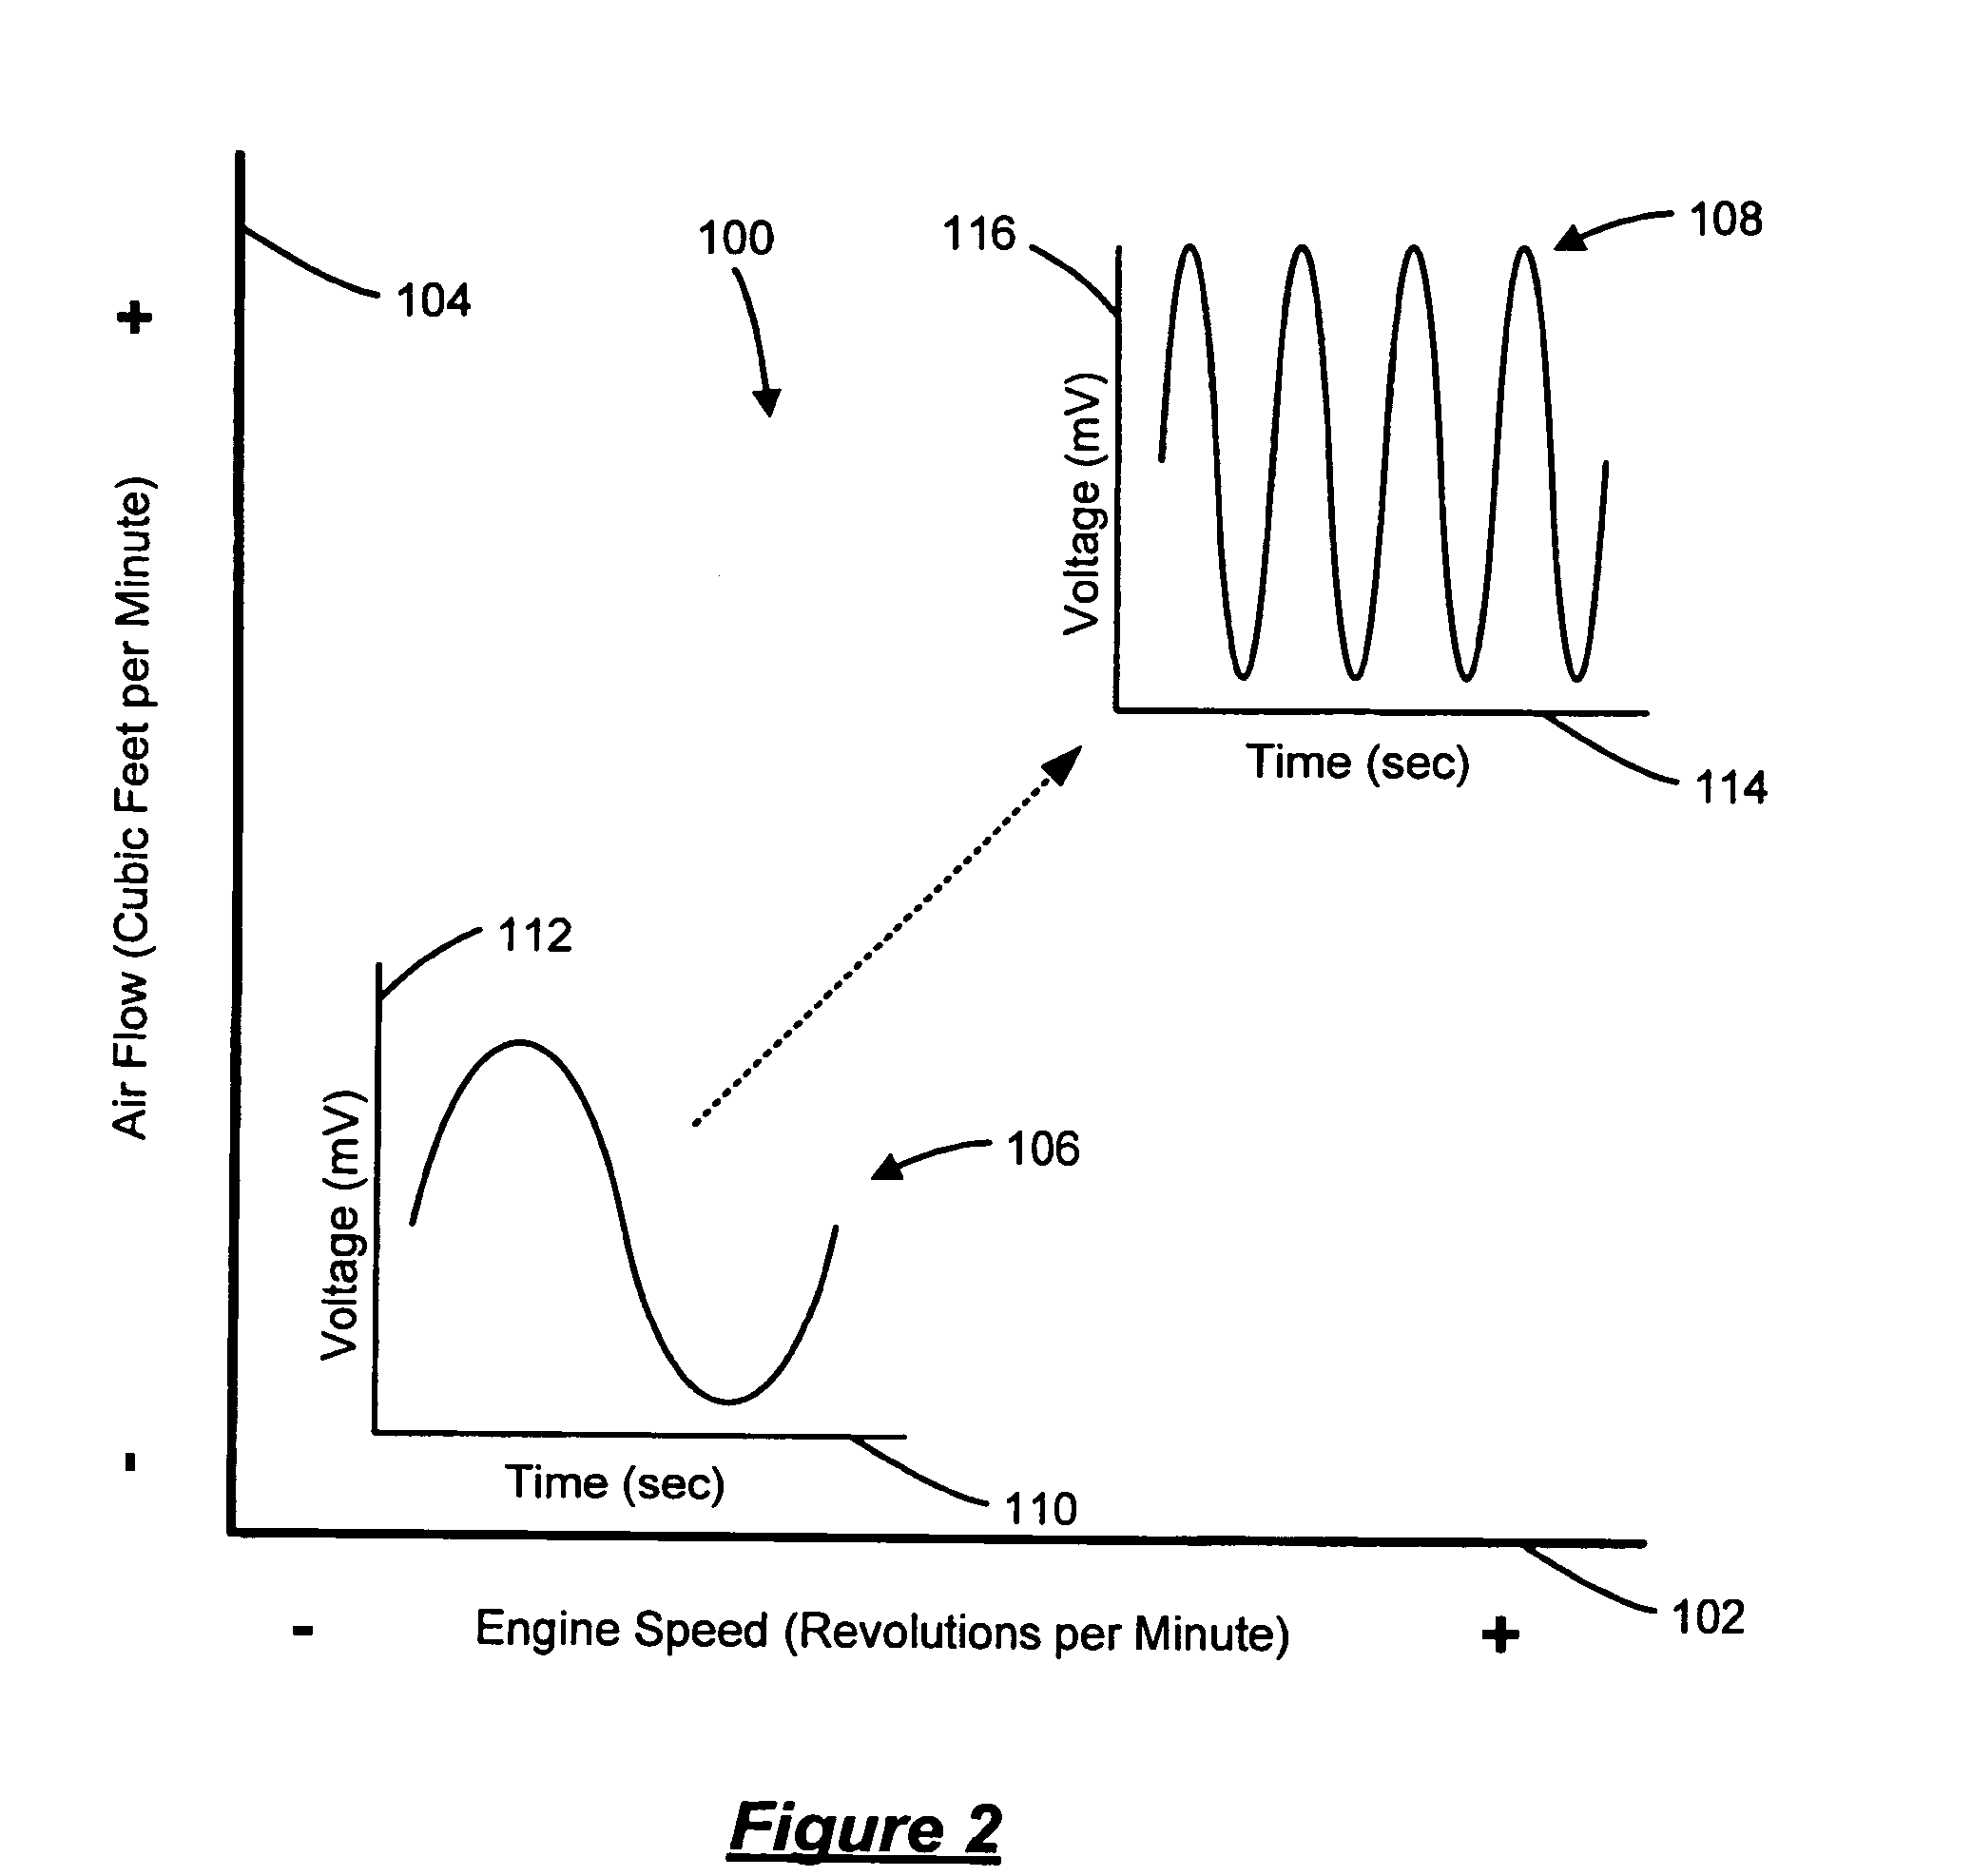 Air/fuel imbalance detection system and method